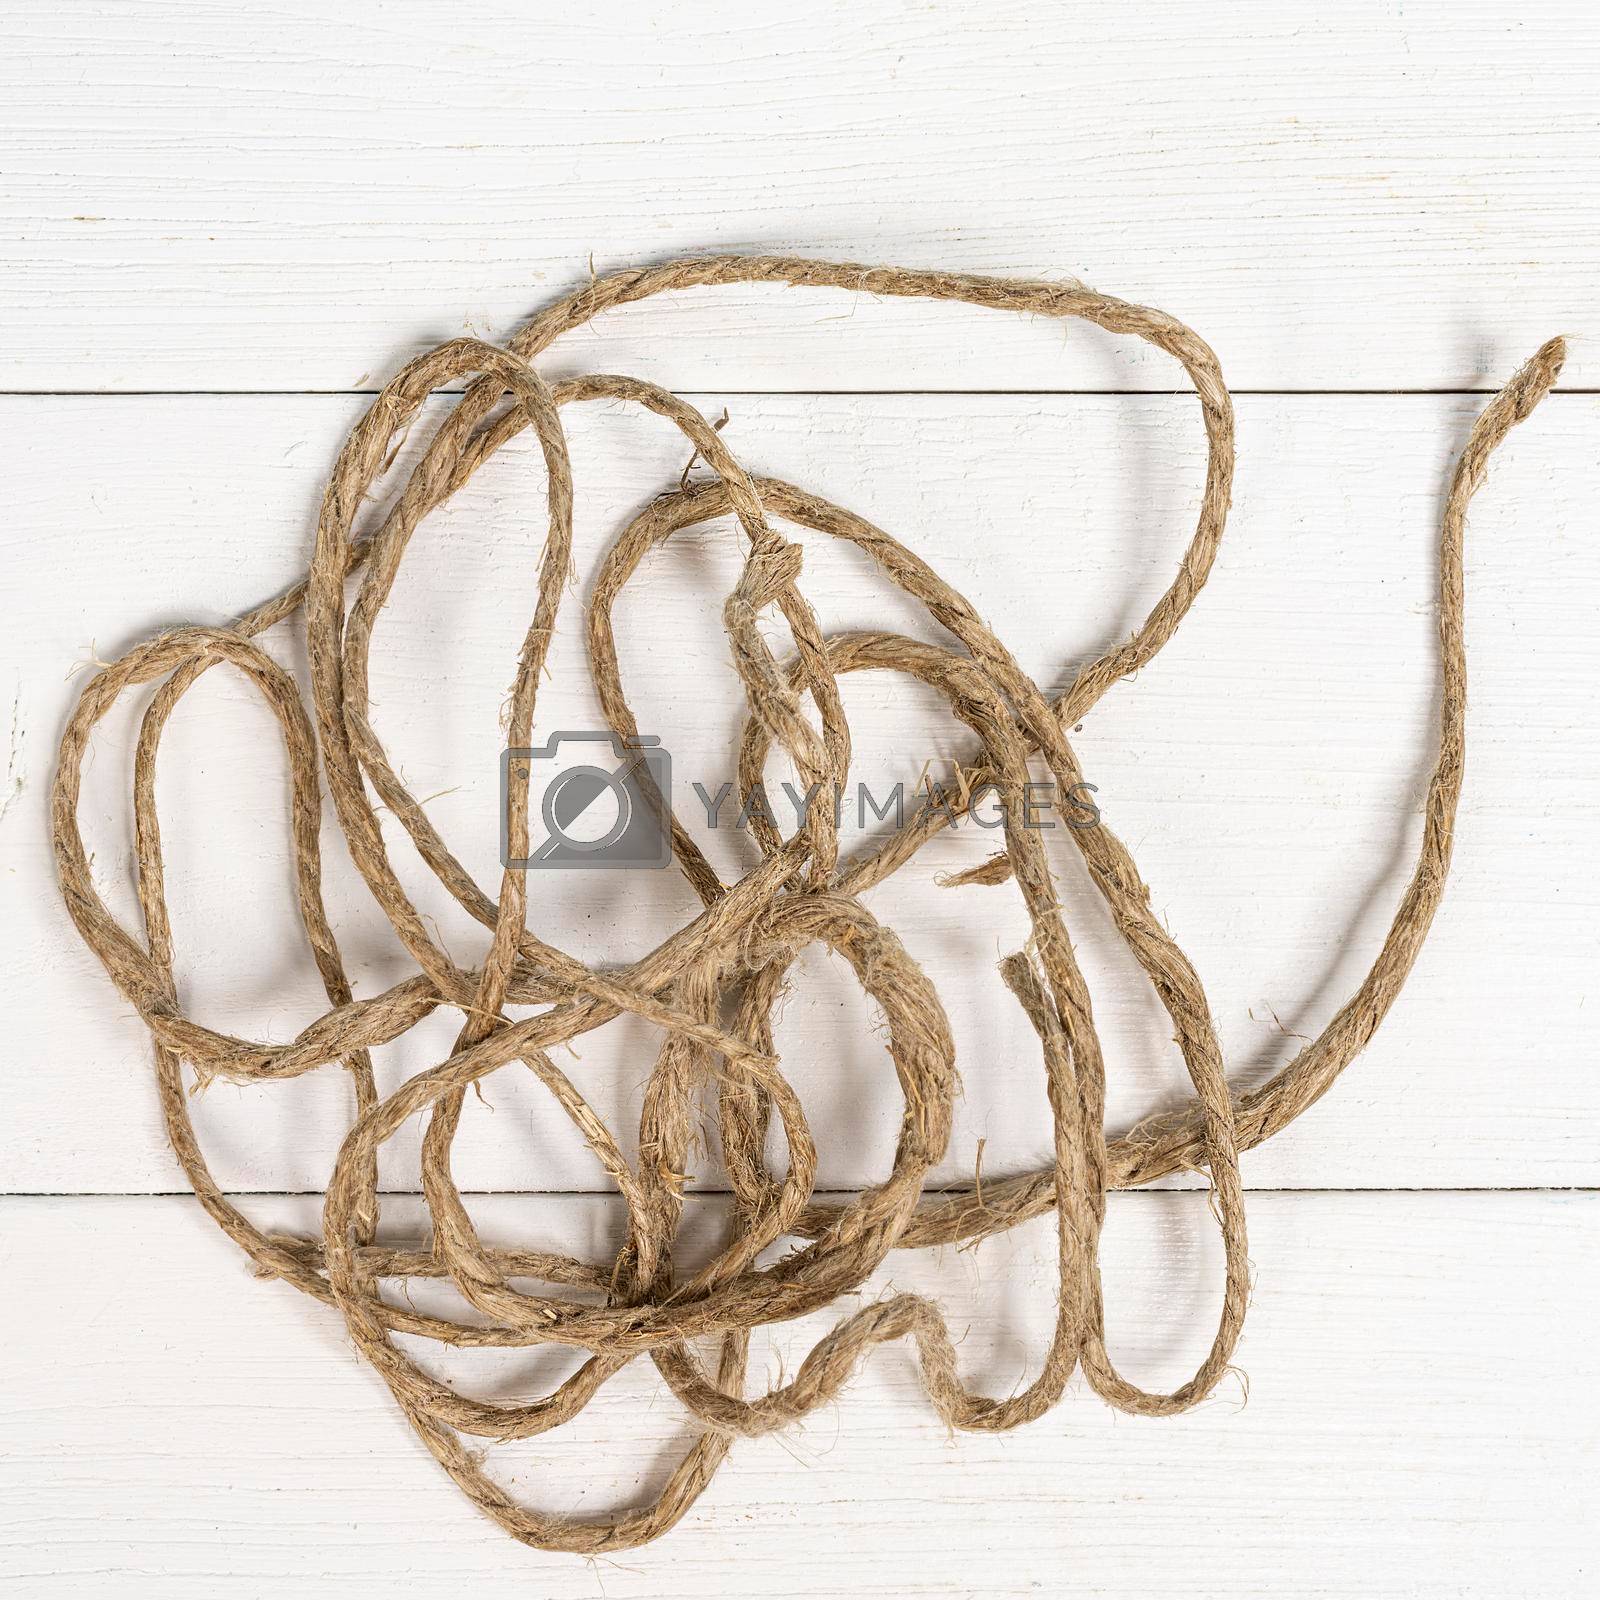 twine tangled on a white wooden surface